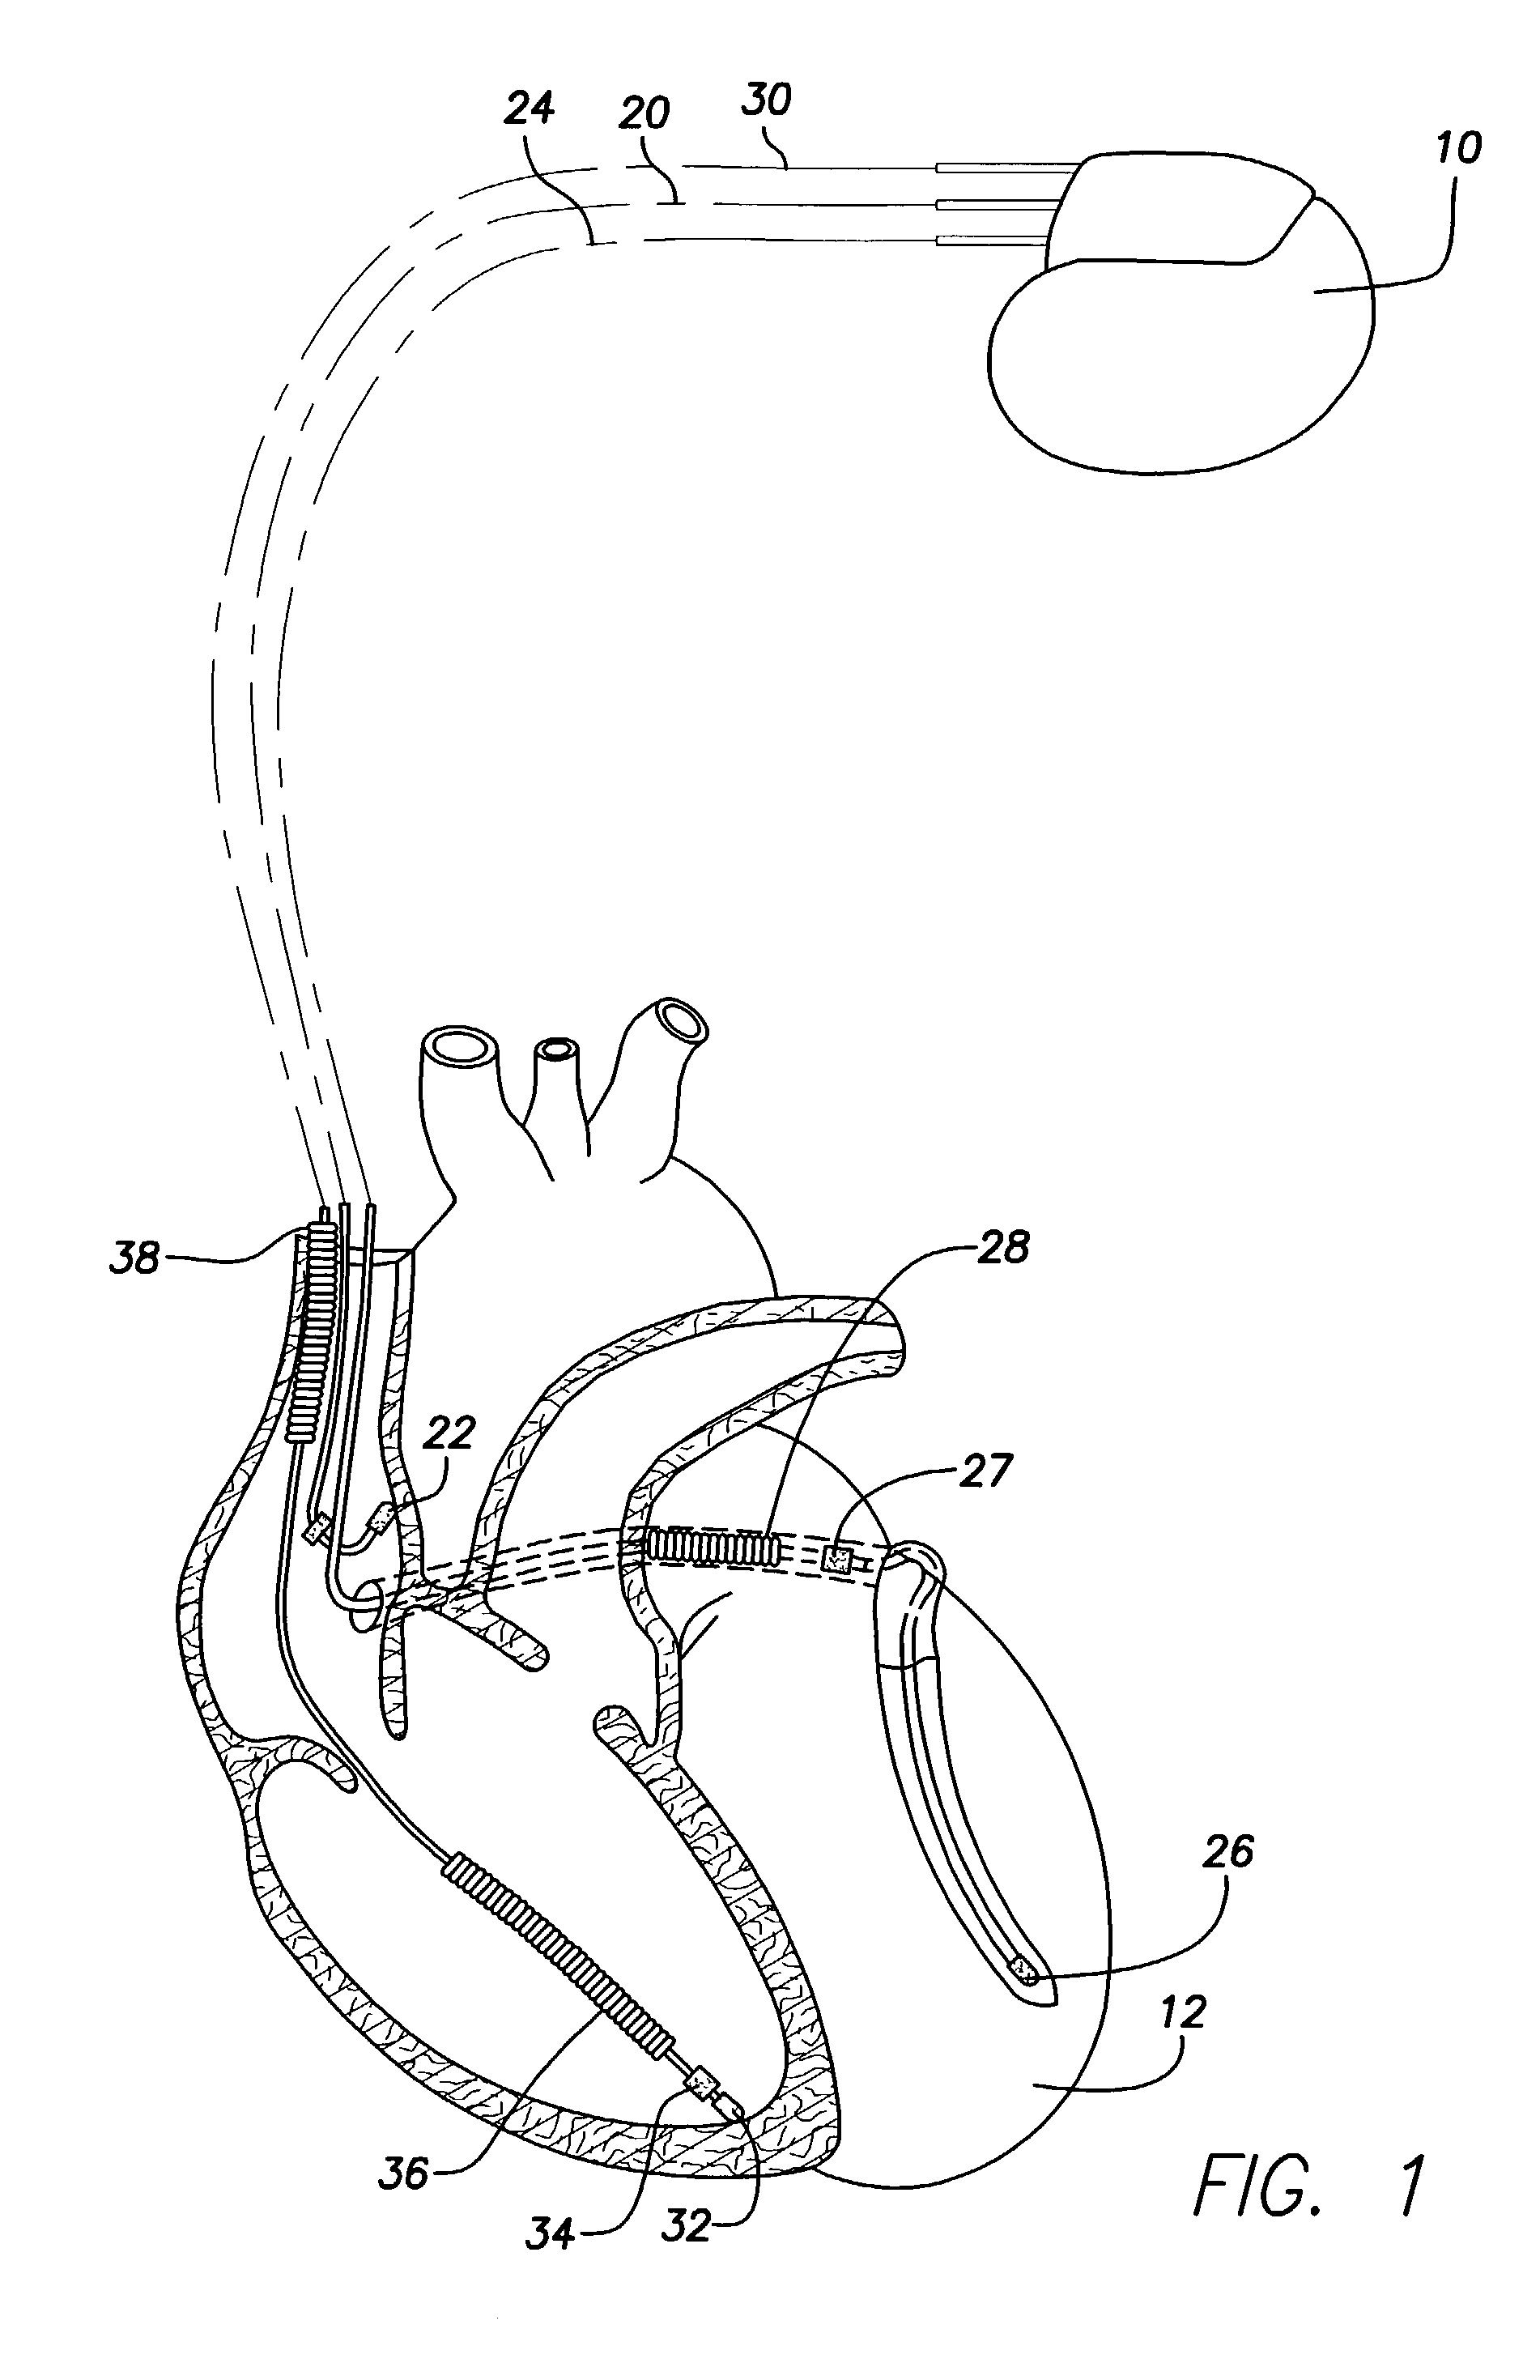 System for the selective activation of functions in an implantable device by a magnetic field